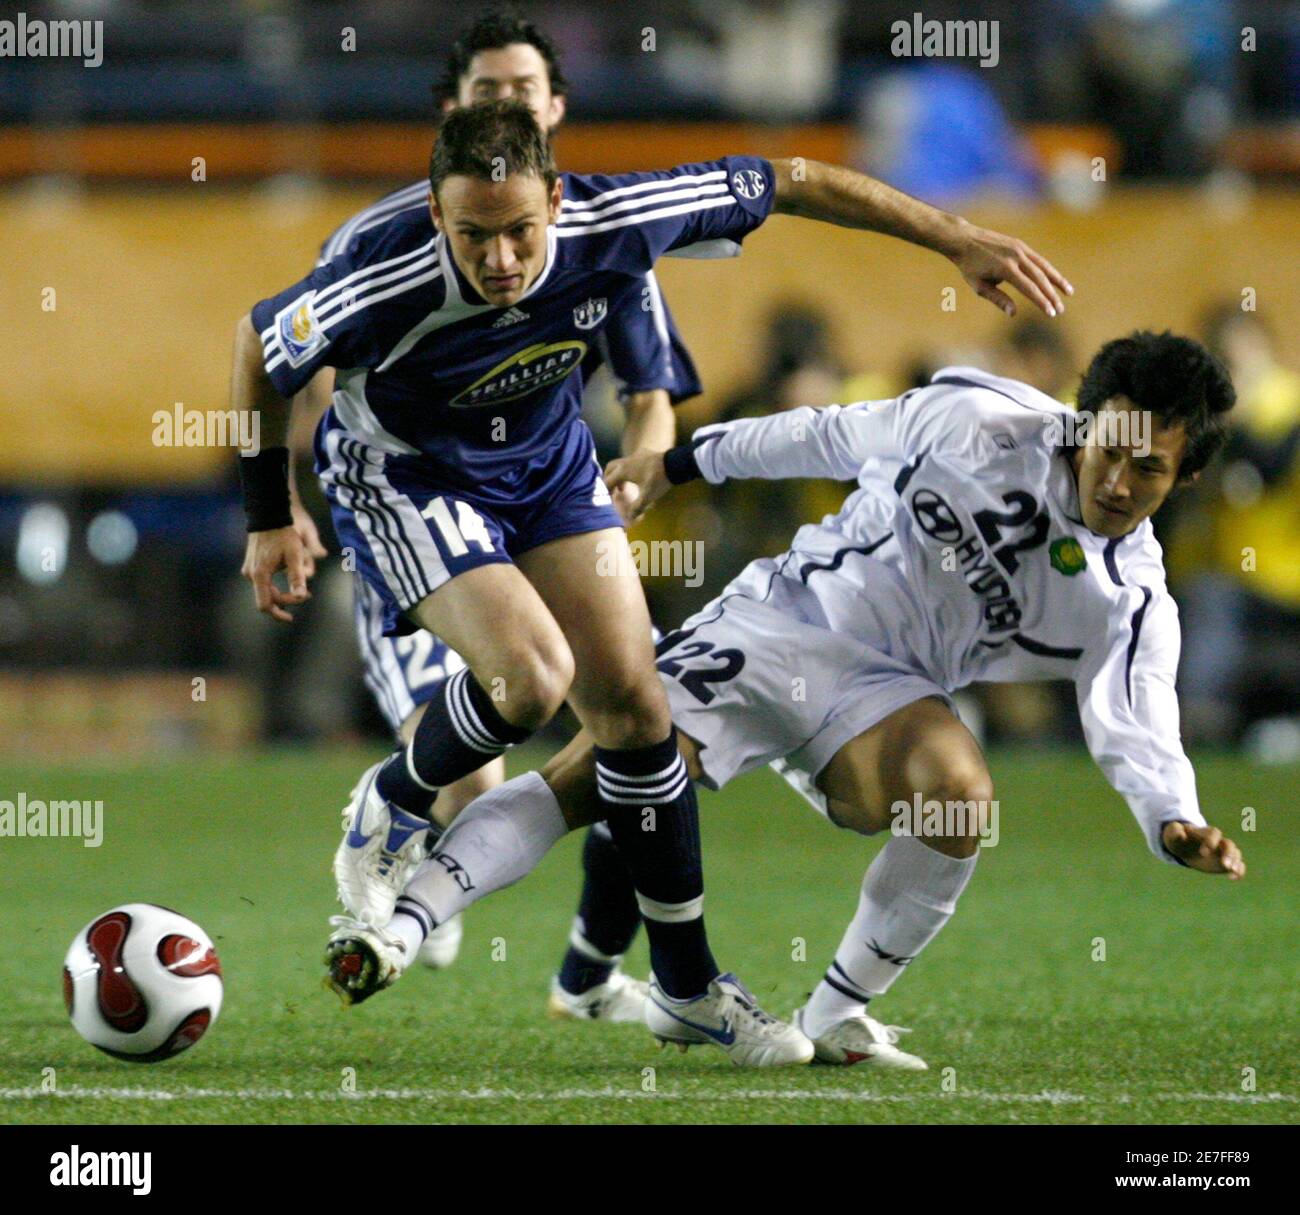 Auckland City FC forward Keryn (14) South Africa battles the ball against Chonbuk Motors midfielder Kim Hyeung-bum (22) of South Korea during the fifth-place play-off match of the FIFA